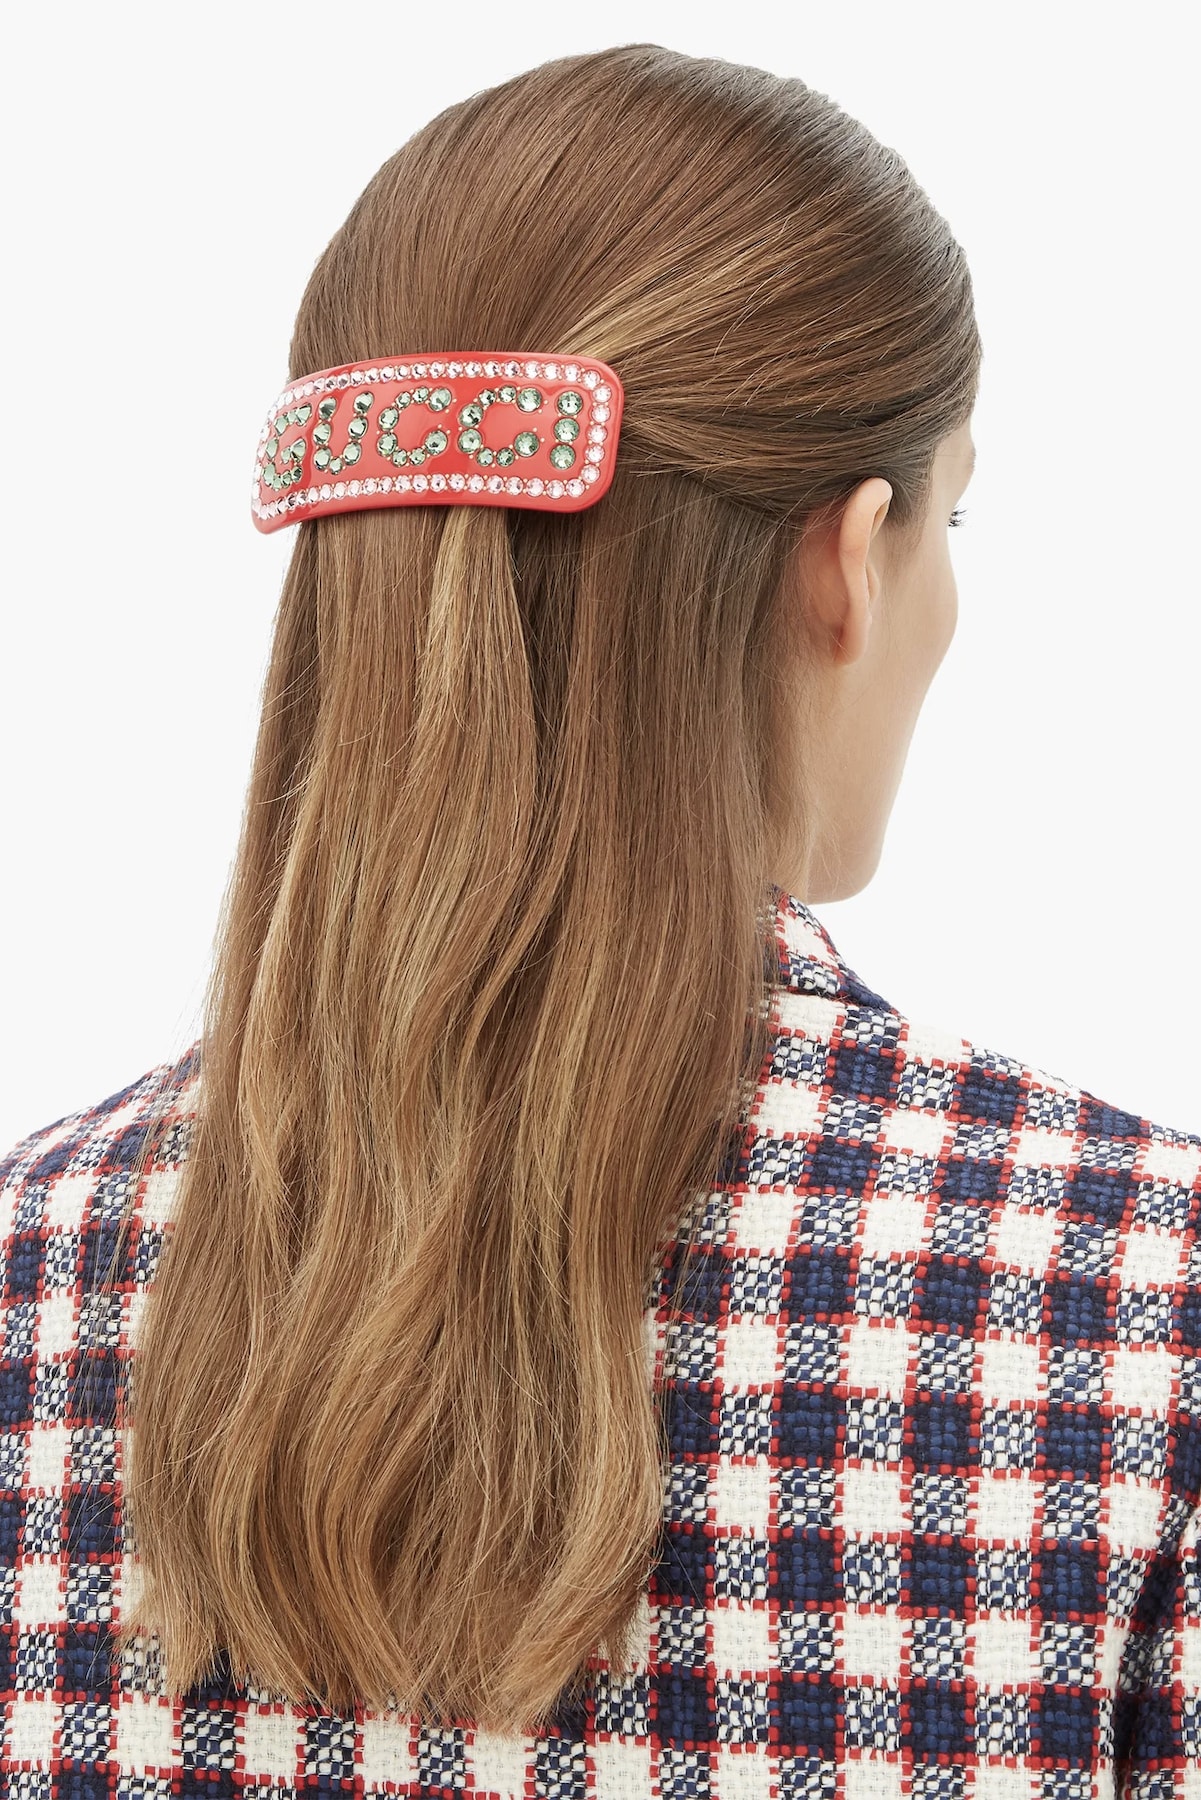 Gucci Rhinestone Logo Hairclip in Red Accessory Pin Statement Hair Trend Fashion 